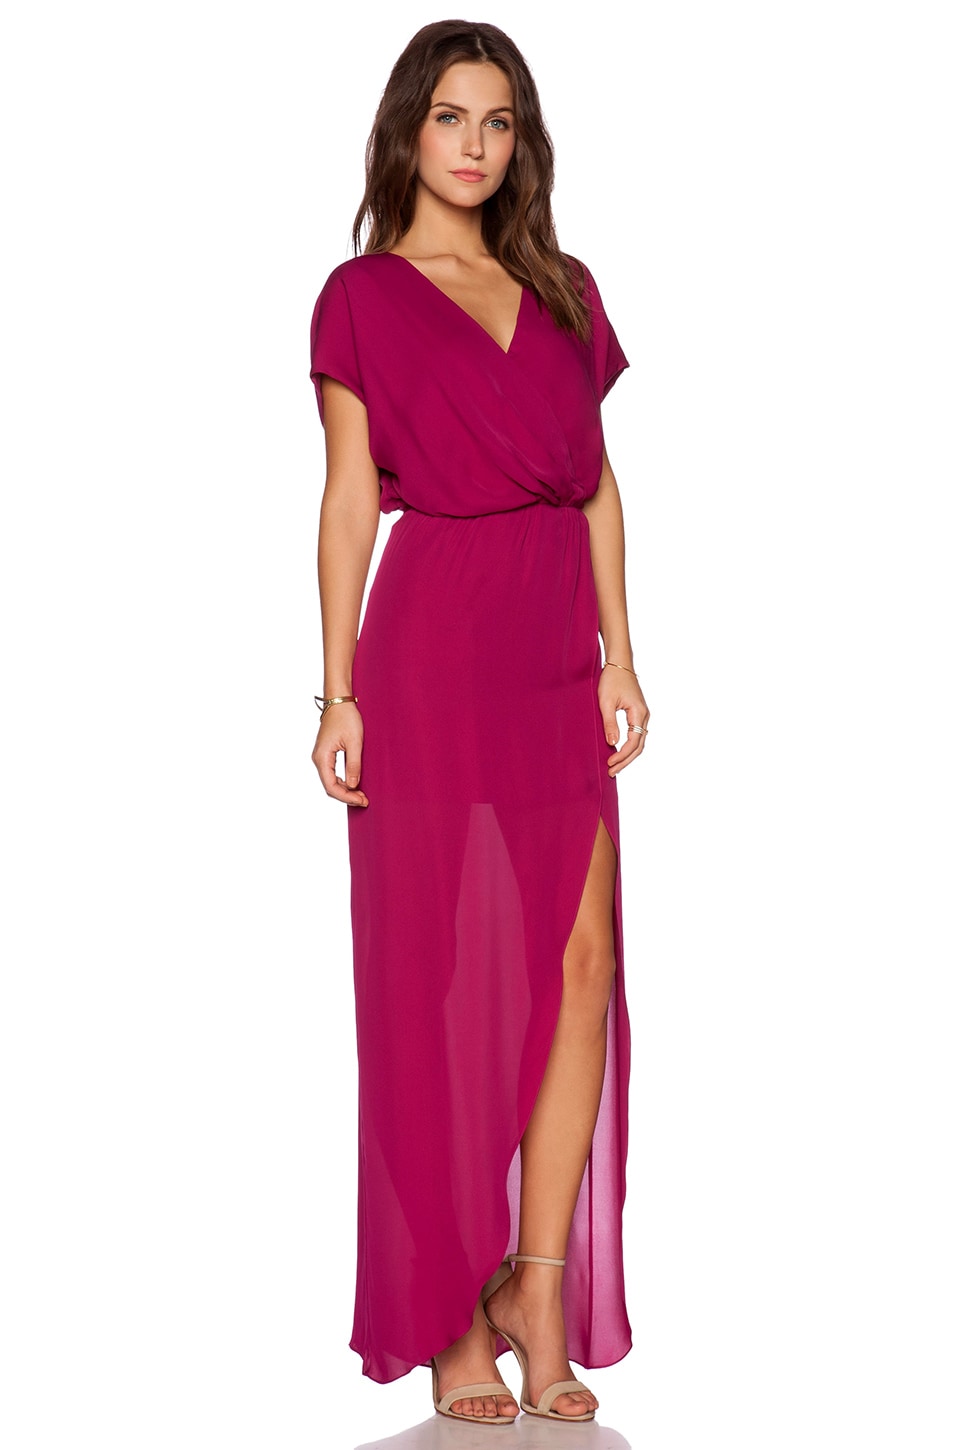 Rory Beca MAID by Yifat Oren Plaza Gown in Magenta | REVOLVE